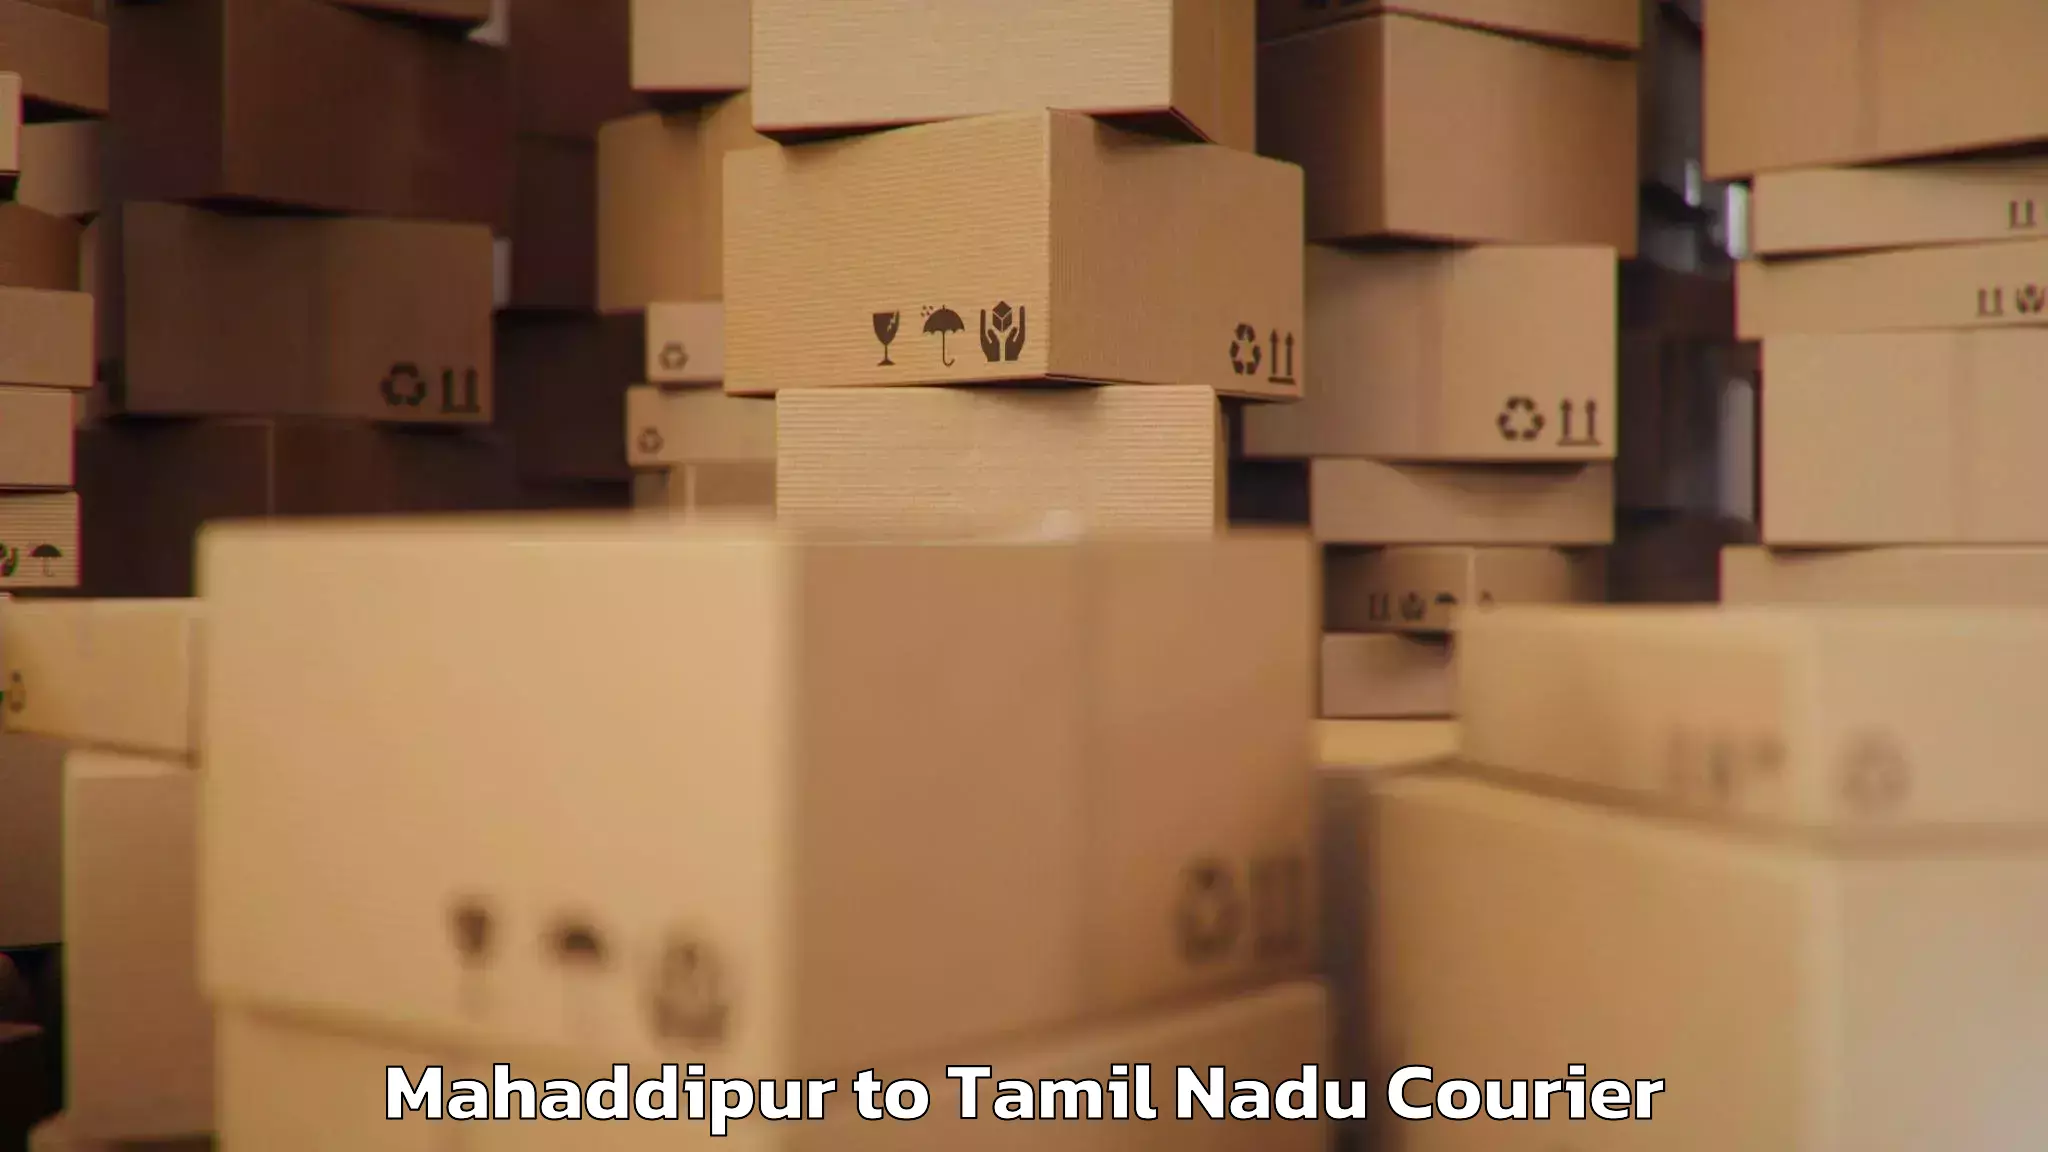 Luggage shipping specialists Mahaddipur to Ennore Port Chennai